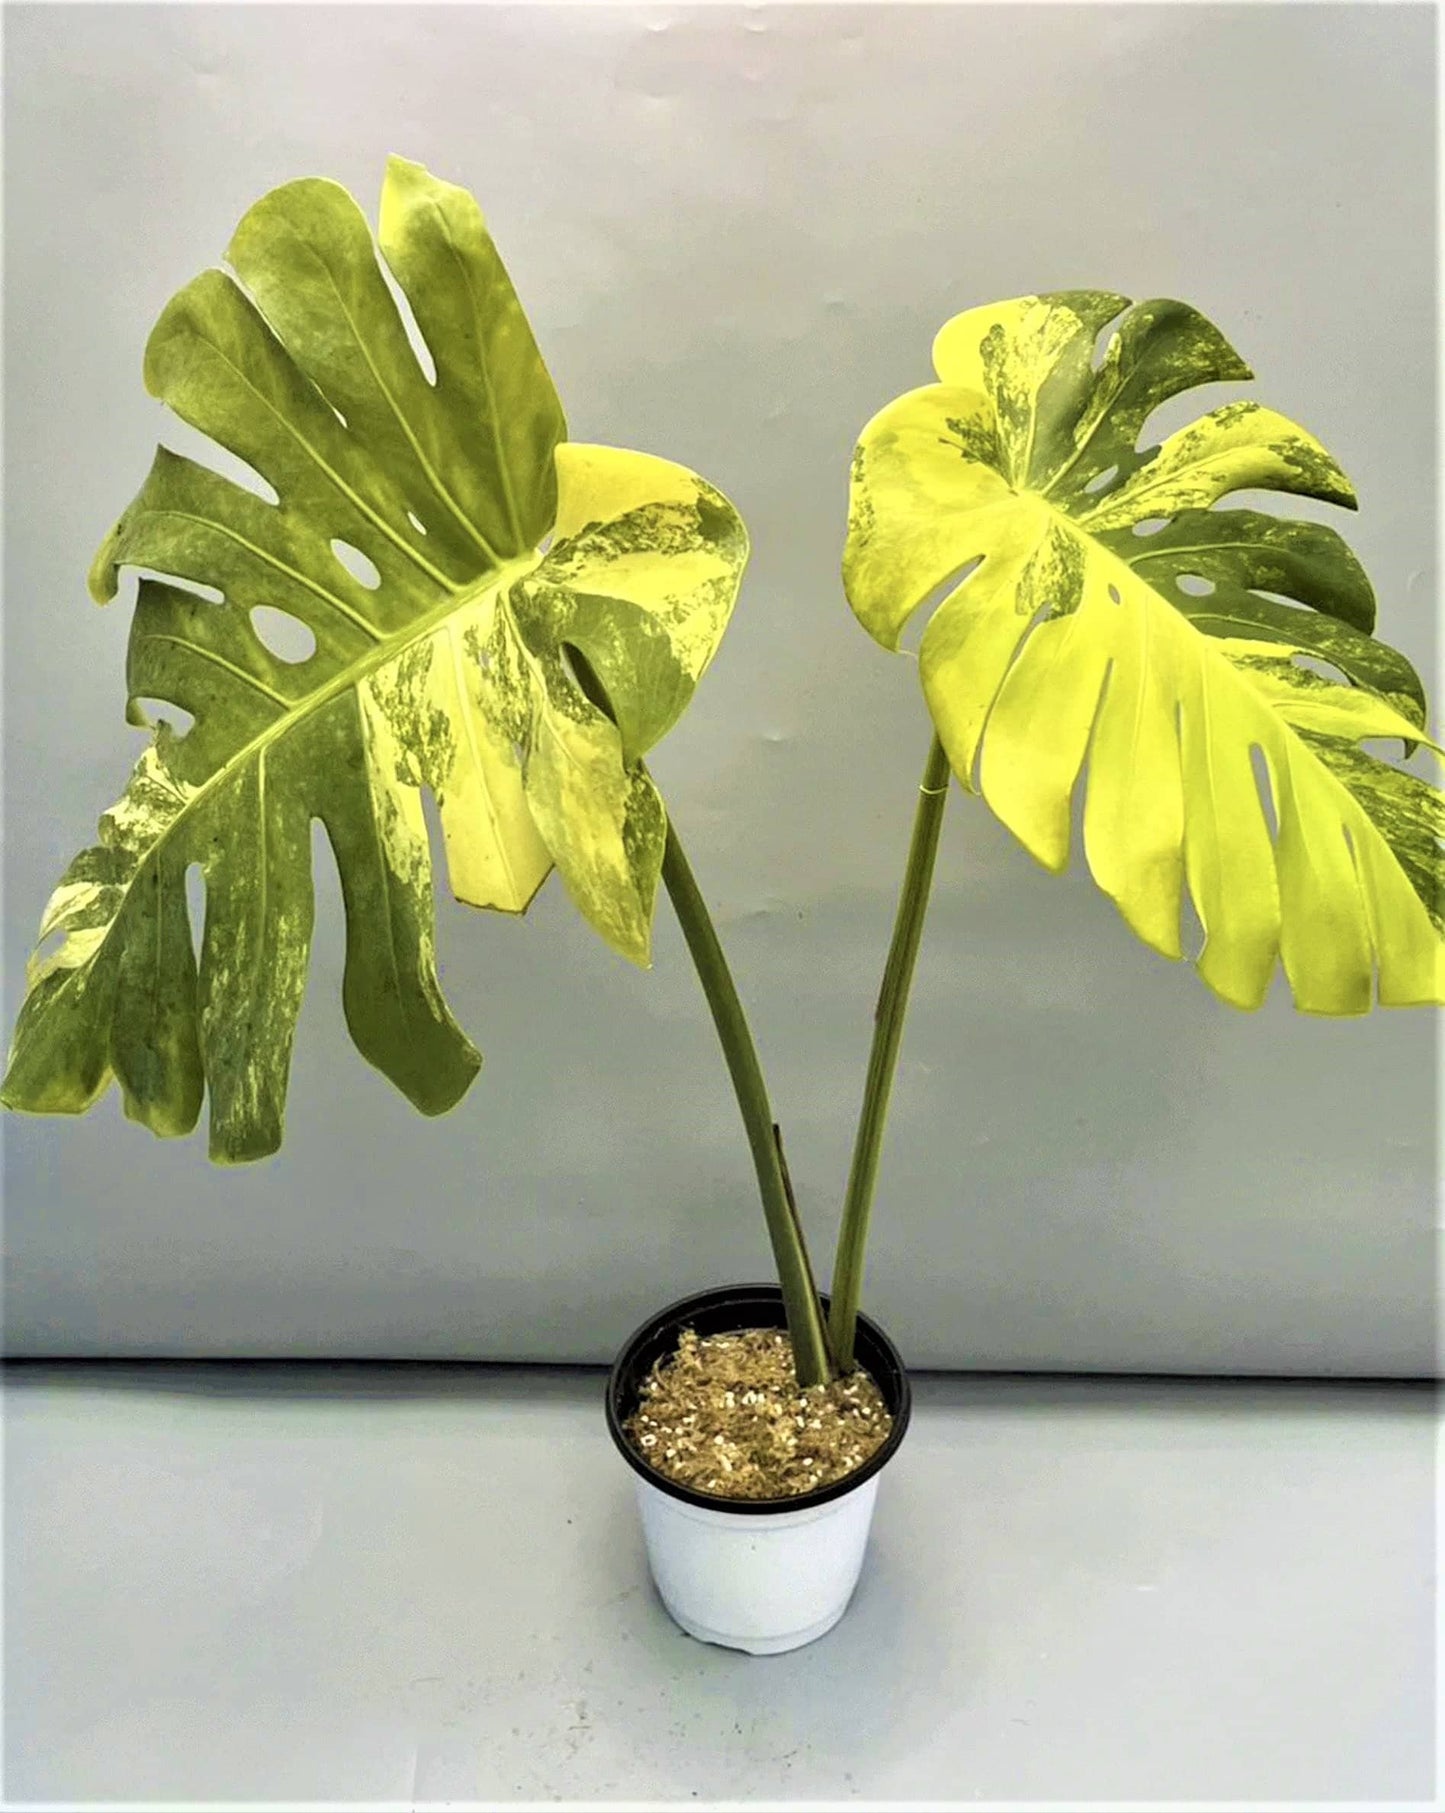 Monstera deliciosa "Yellow Marilyn" variegated SM TC plant *Preorder* (5414P:2) | US-Based Seller | Rare Aroid